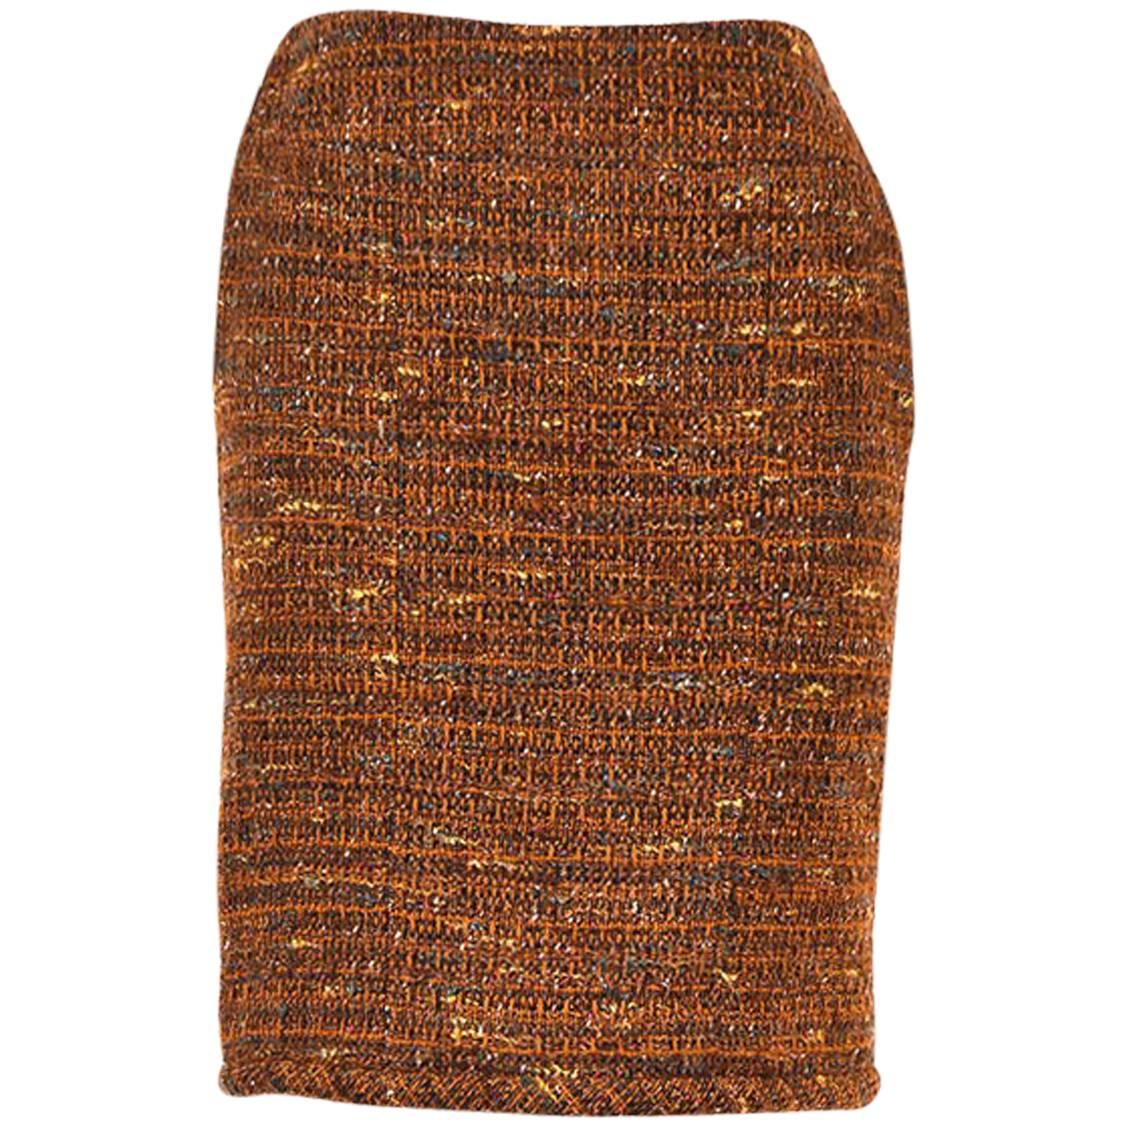 Chanel Autumn 1998 Brown Multicolor Wool Tweed Skirt SZ 36 For Sale